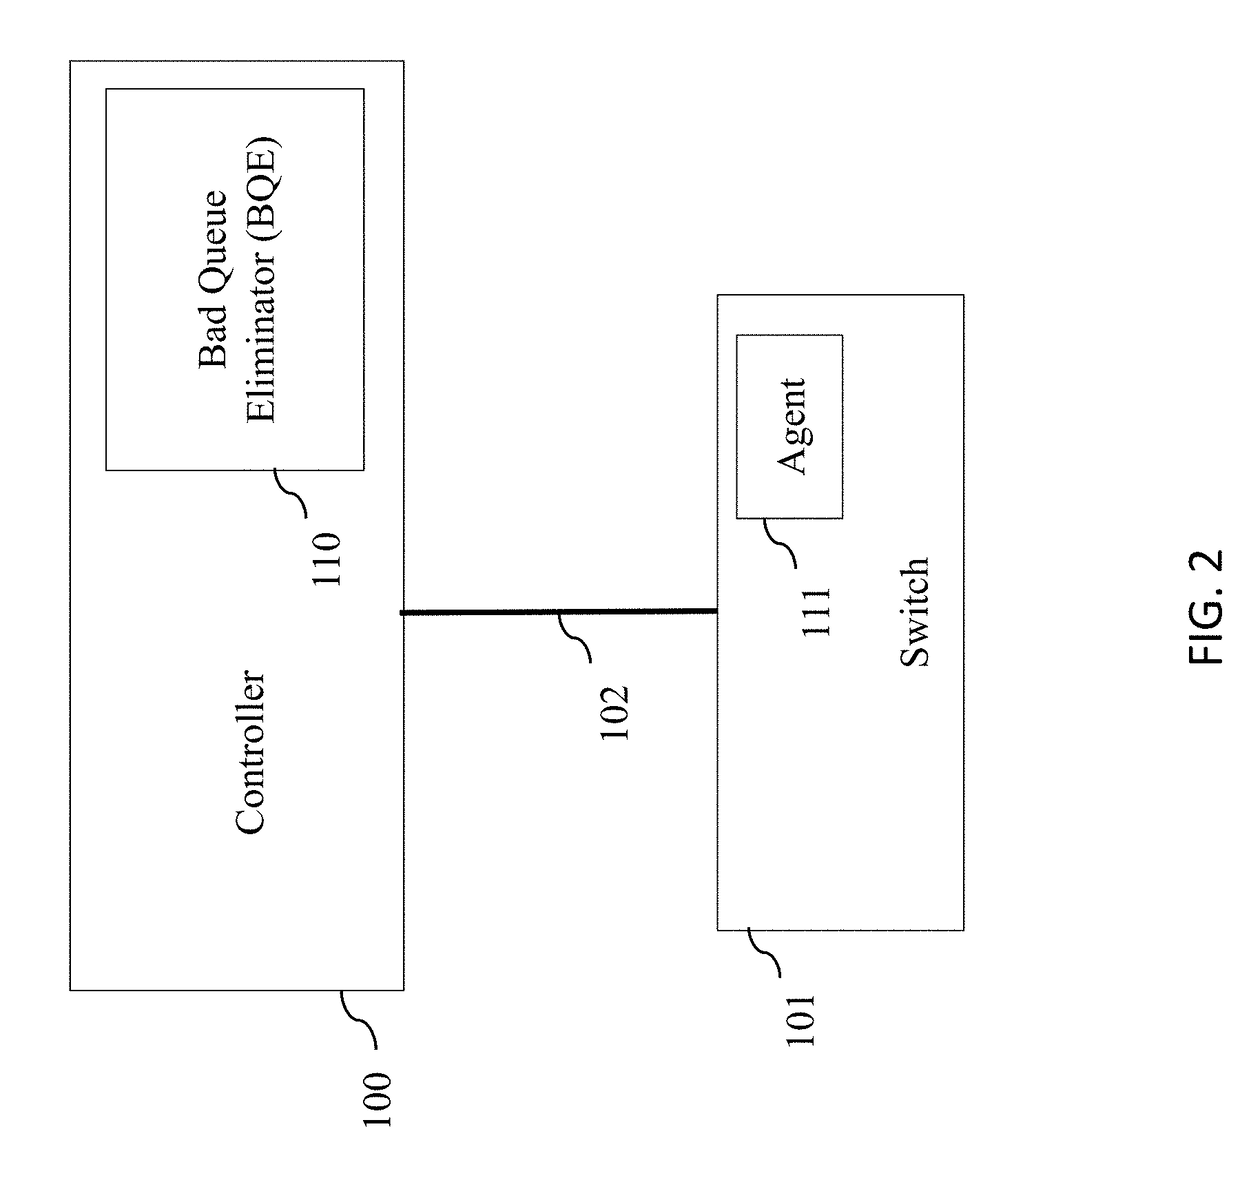 System and method to prevent persistent full switch queues in software defined networks